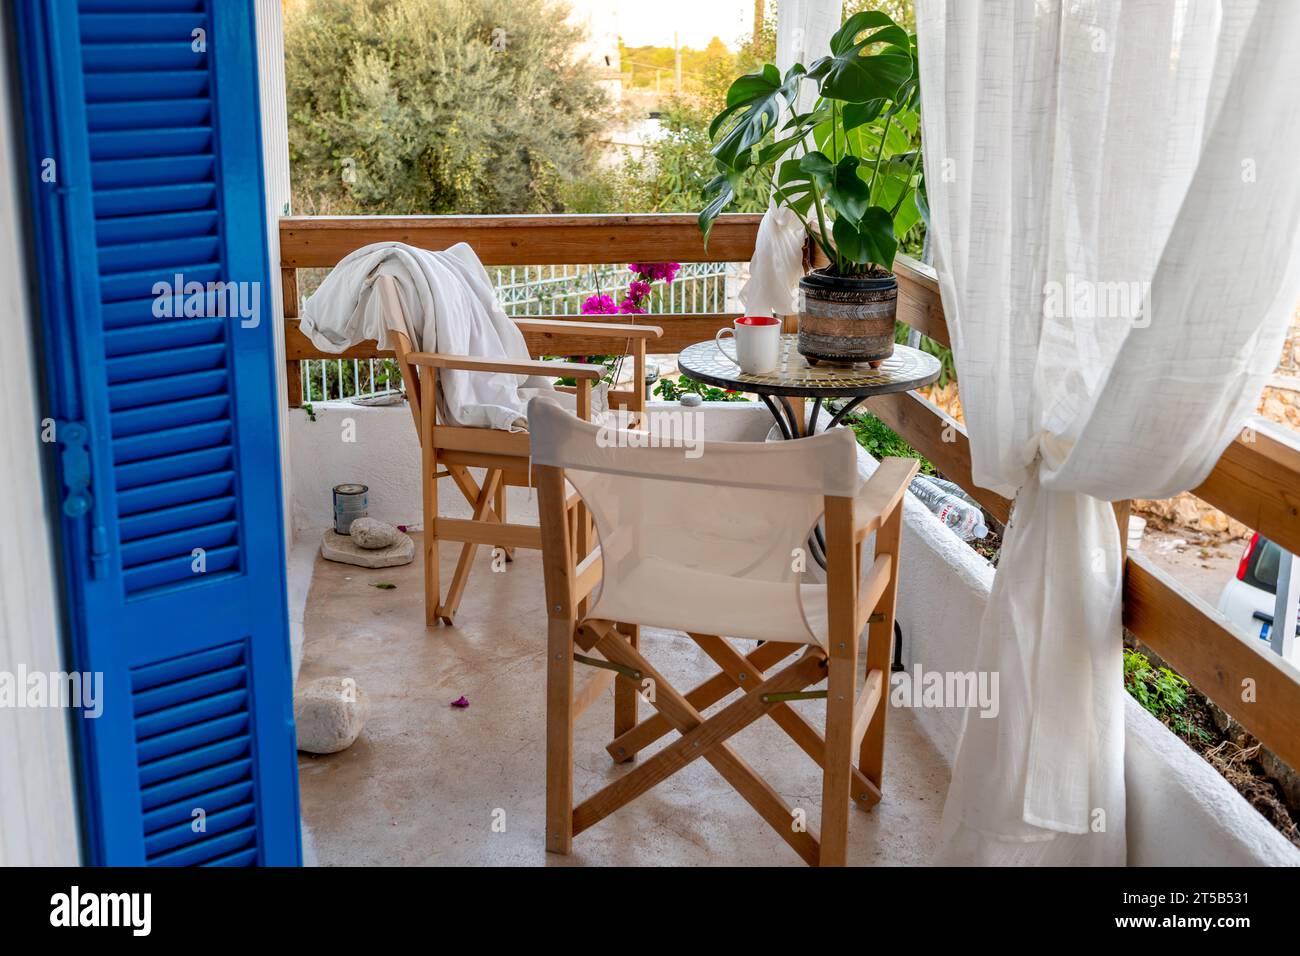 A Mediterranean style balcony for peaceful relaxation. Stock Photo